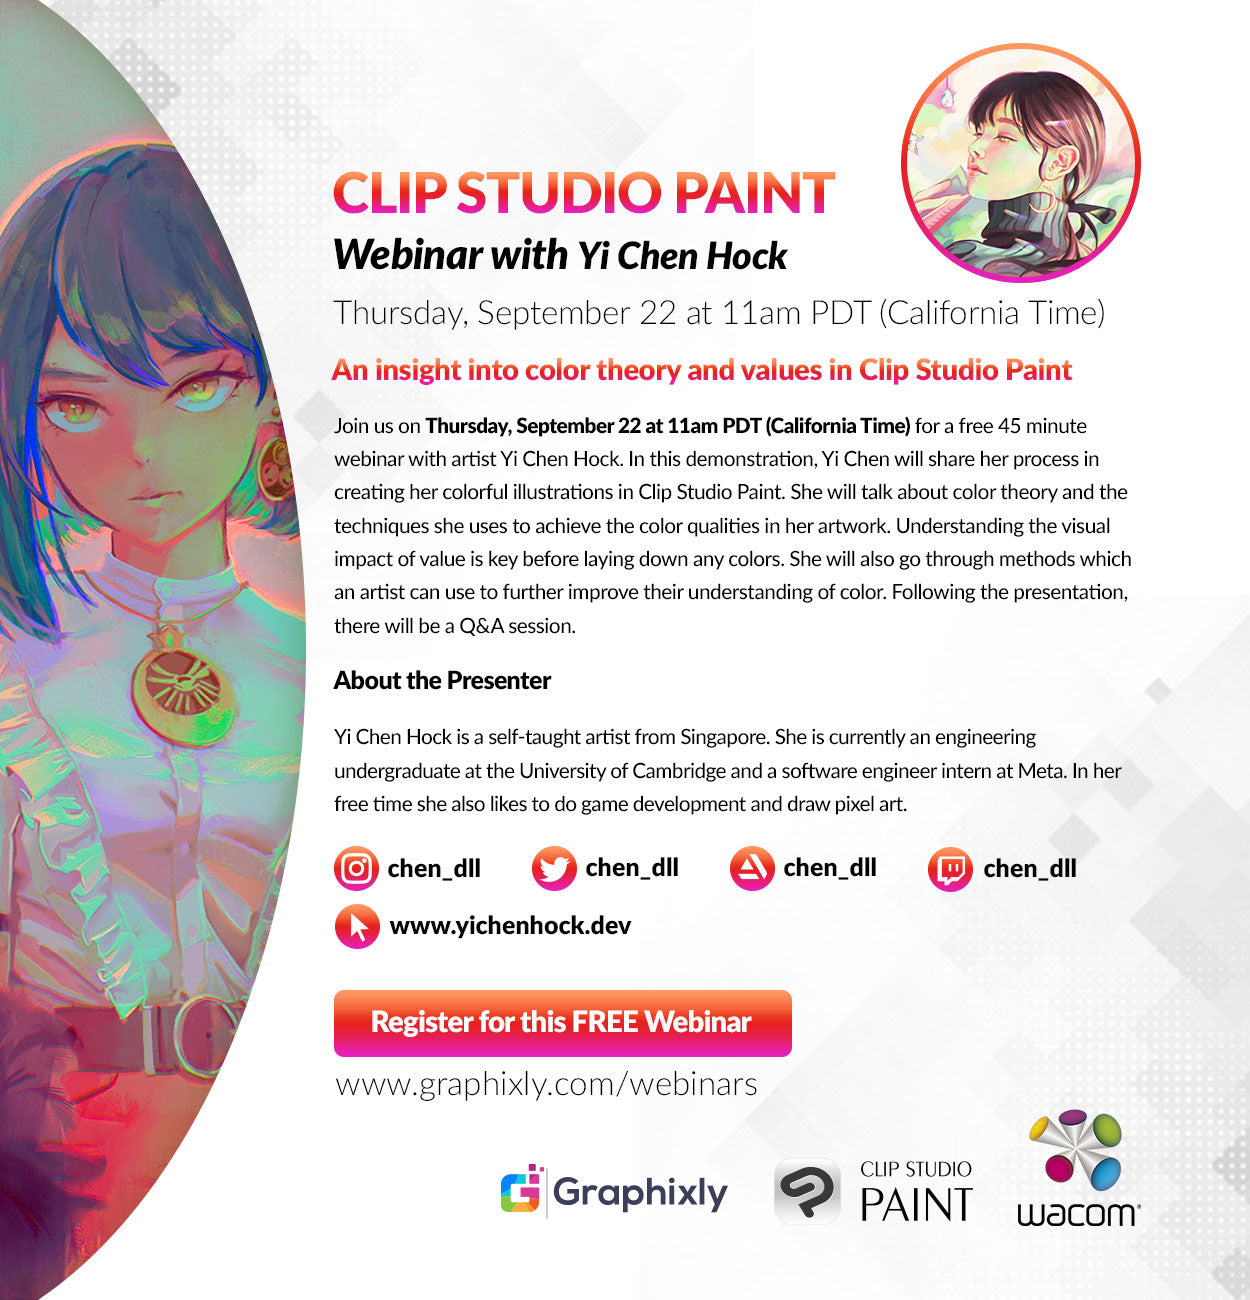 Webinar – An insight into color theory and values in Clip Studio Paint with Yi Chen Hock